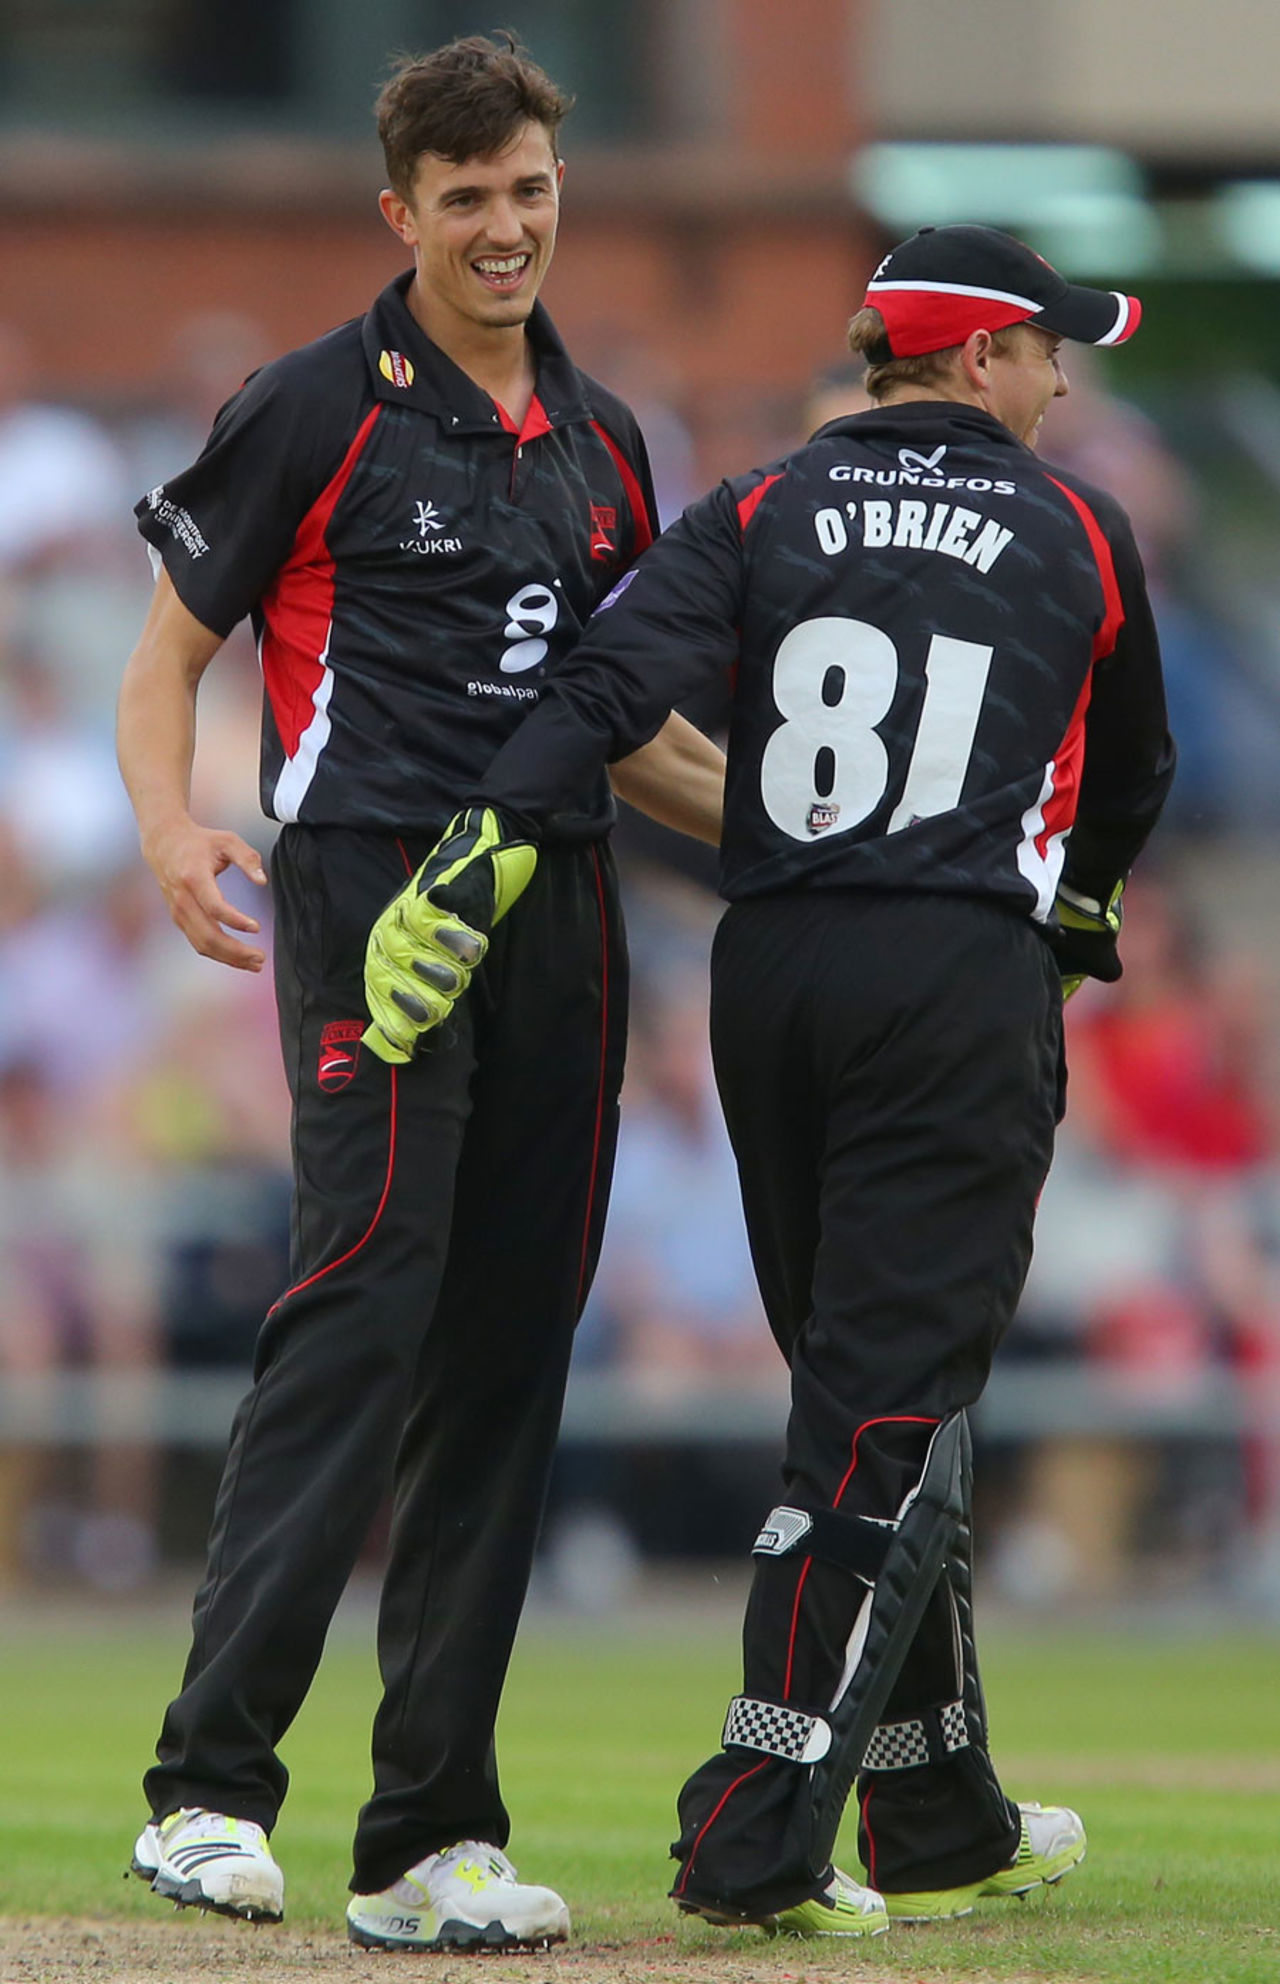 Leicestershire's loan signing Richard Jones was in the wickets, Lancashire v Leicestershire, NatWest T20 Blast, Northern Division, Old Trafford, June 13, 2014